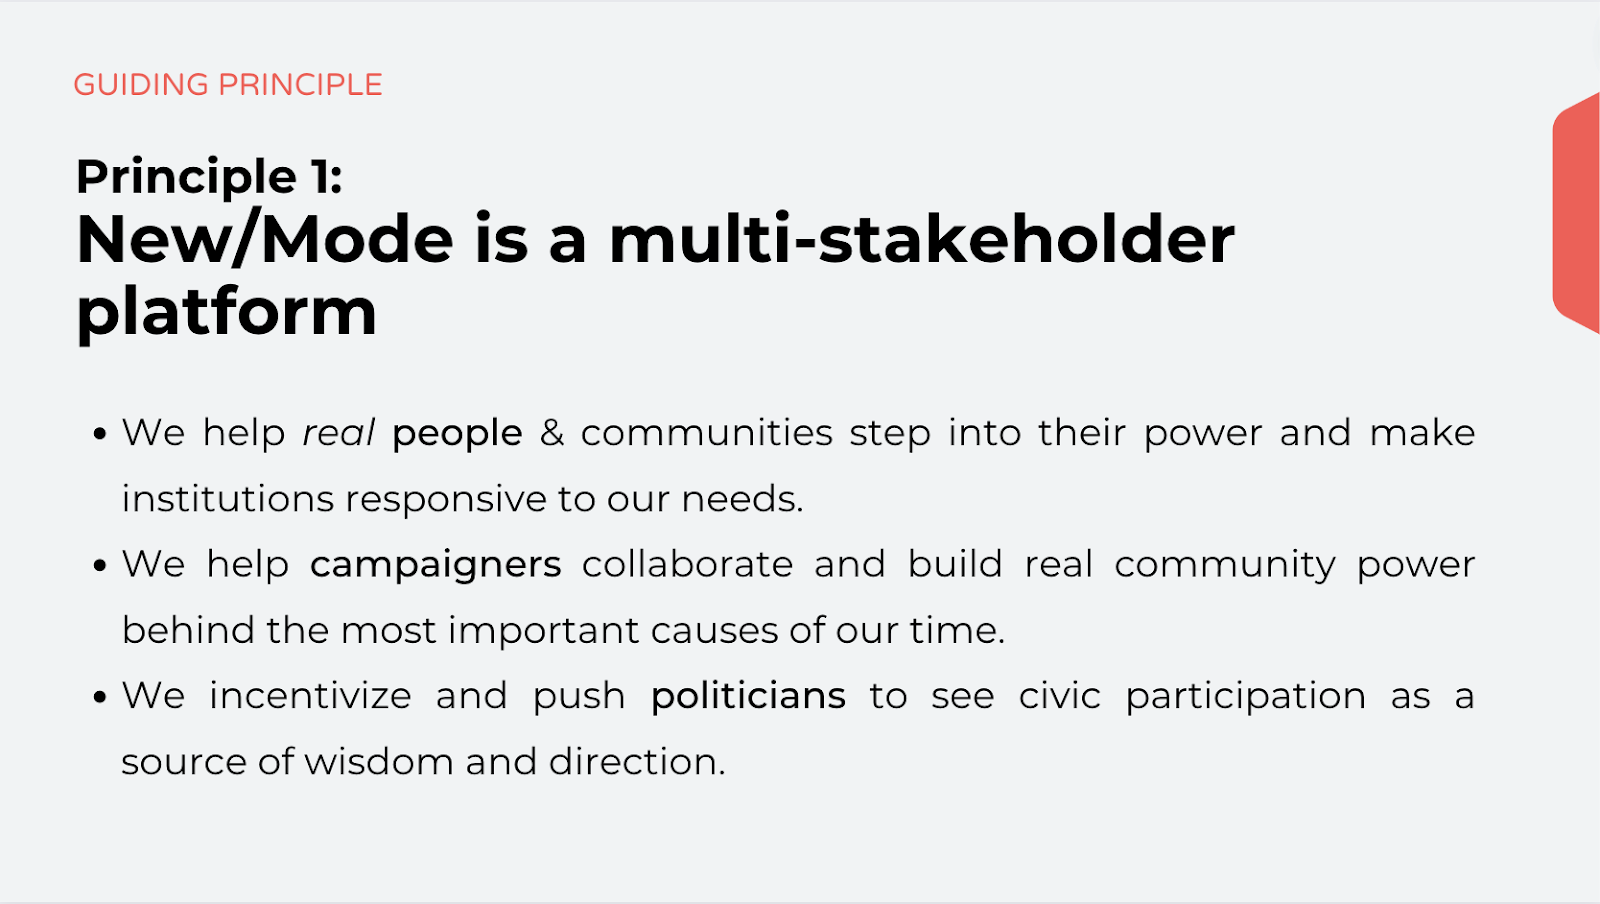 New/Mode is a multi-stakeholder platform